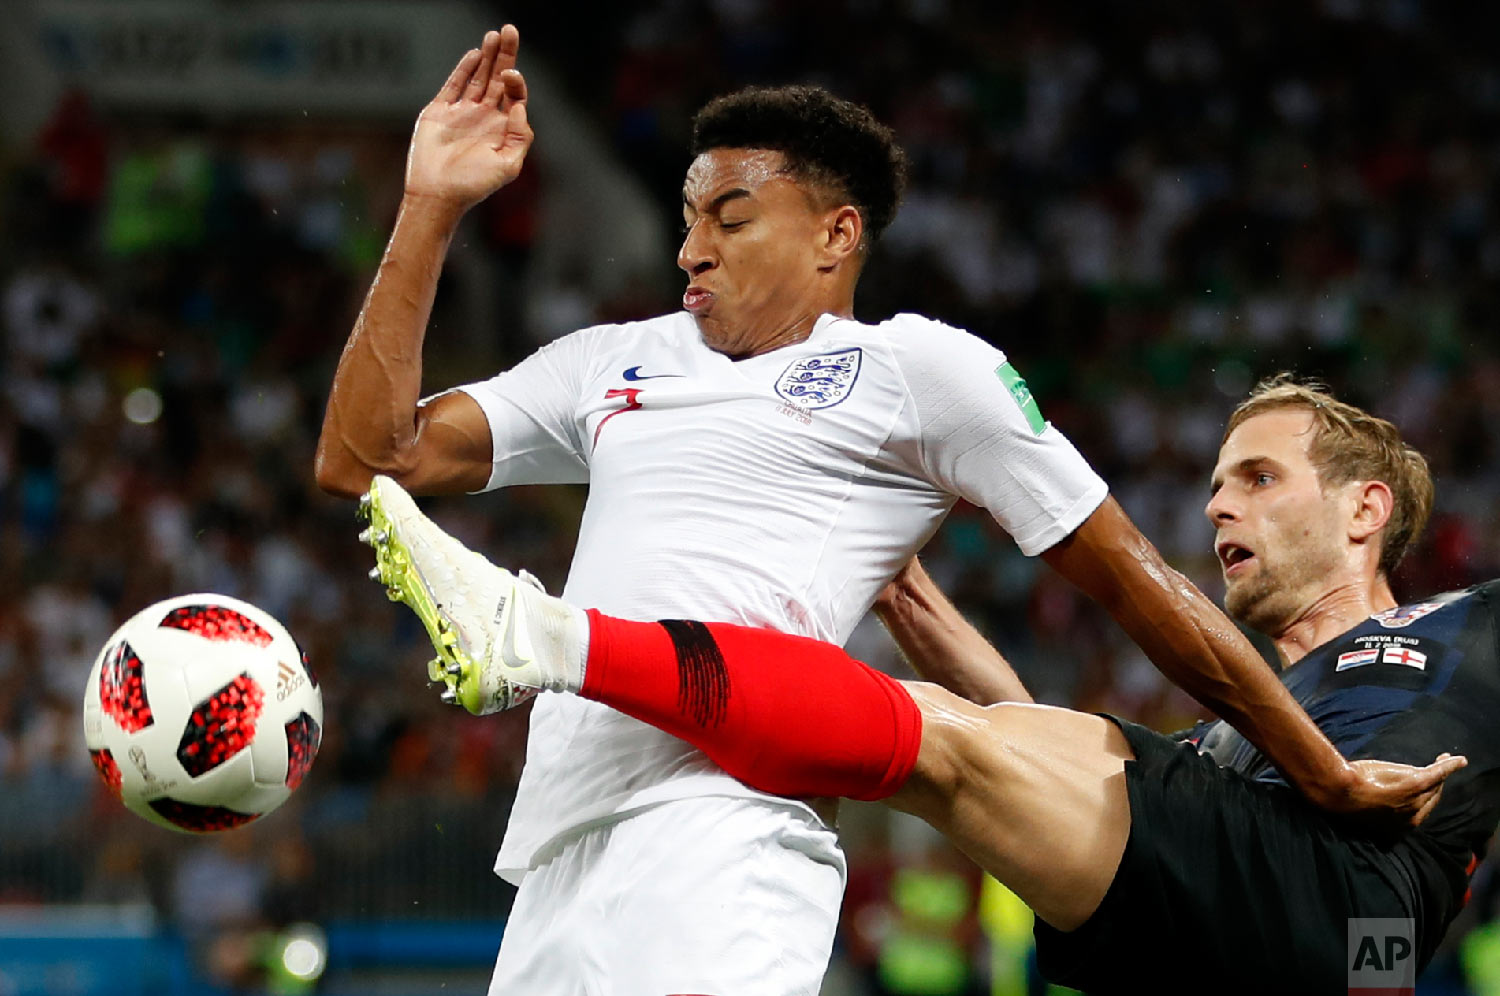  Croatia's Ivan Strinic, right, challenges for the ball England's Jesse Lingard, left, during the semifinal match between Croatia and England at the 2018 soccer World Cup in the Luzhniki Stadium in Moscow, Russia, Wednesday, July 11, 2018. (AP Photo/